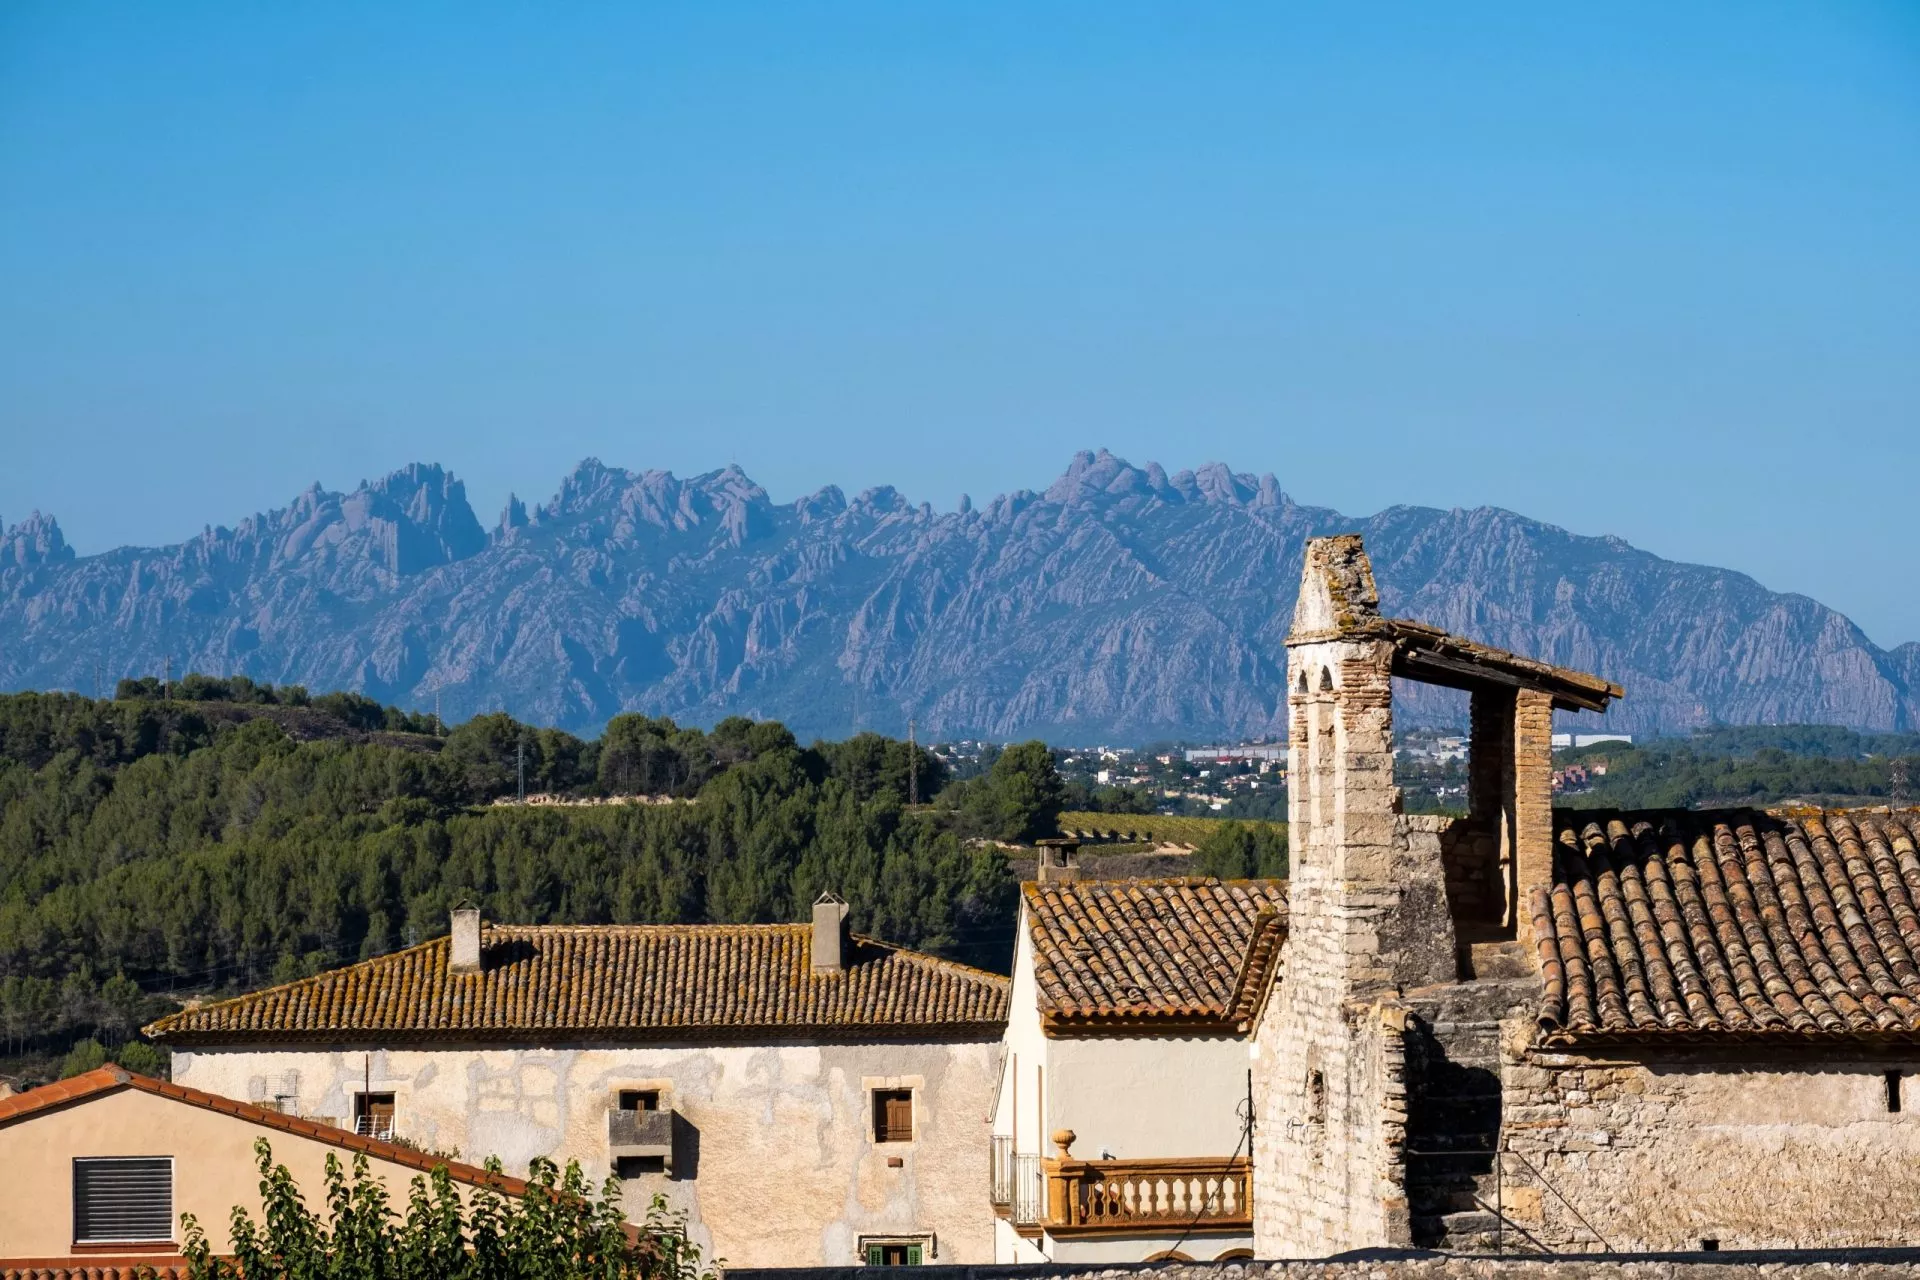 A closeup view of buildings in Torre Romana medieval village in the Penedes region